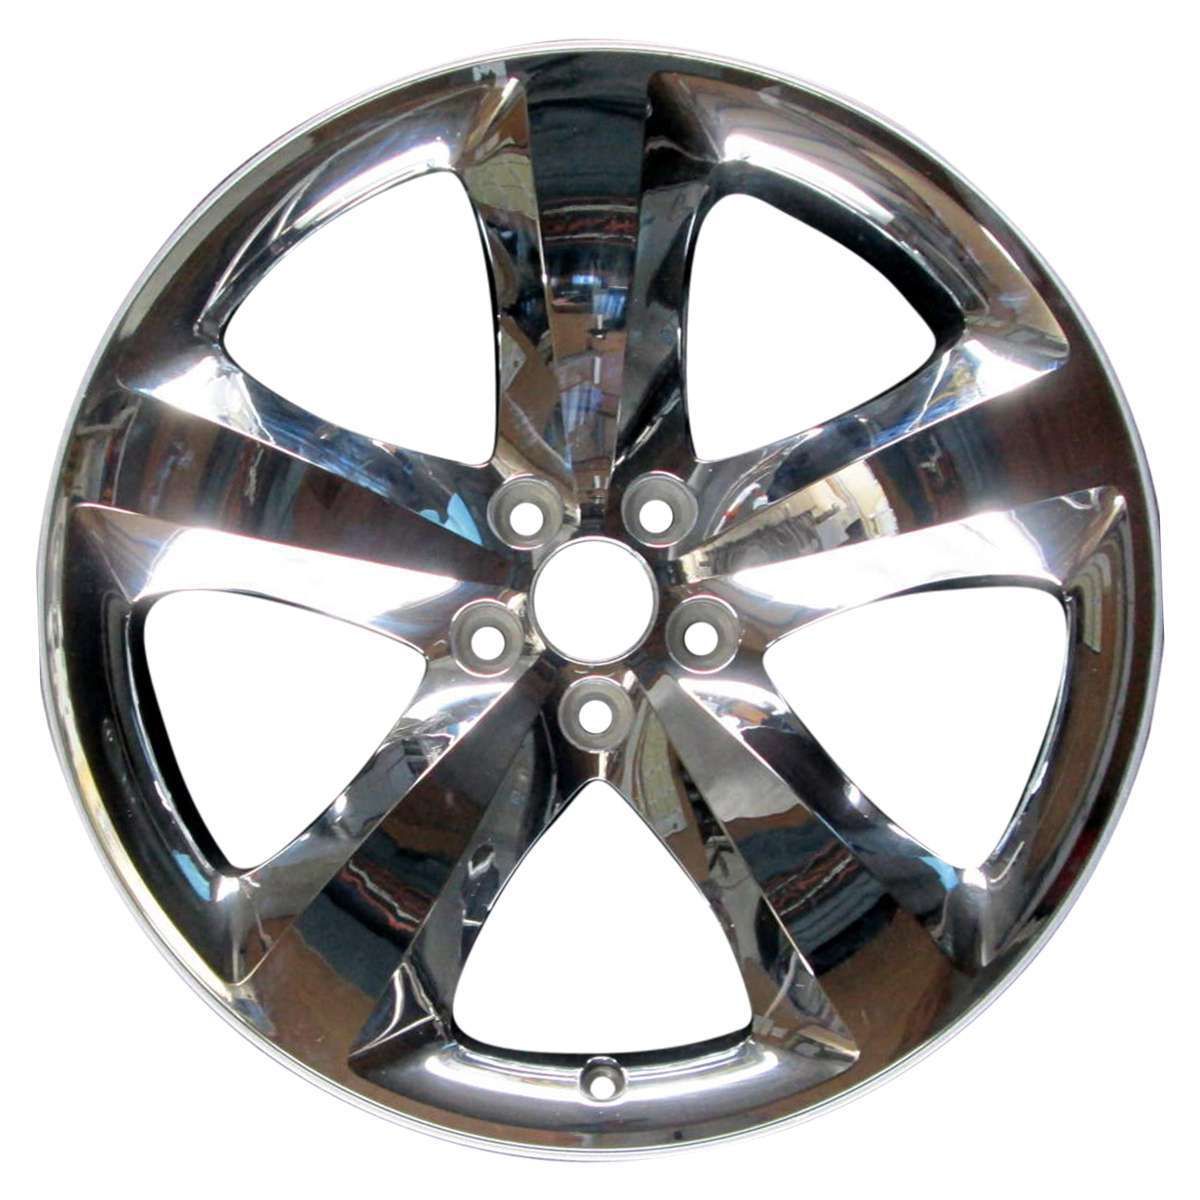 2012 Dodge Charger New 20" Replacement Wheel Rim RW2411XCCLAD